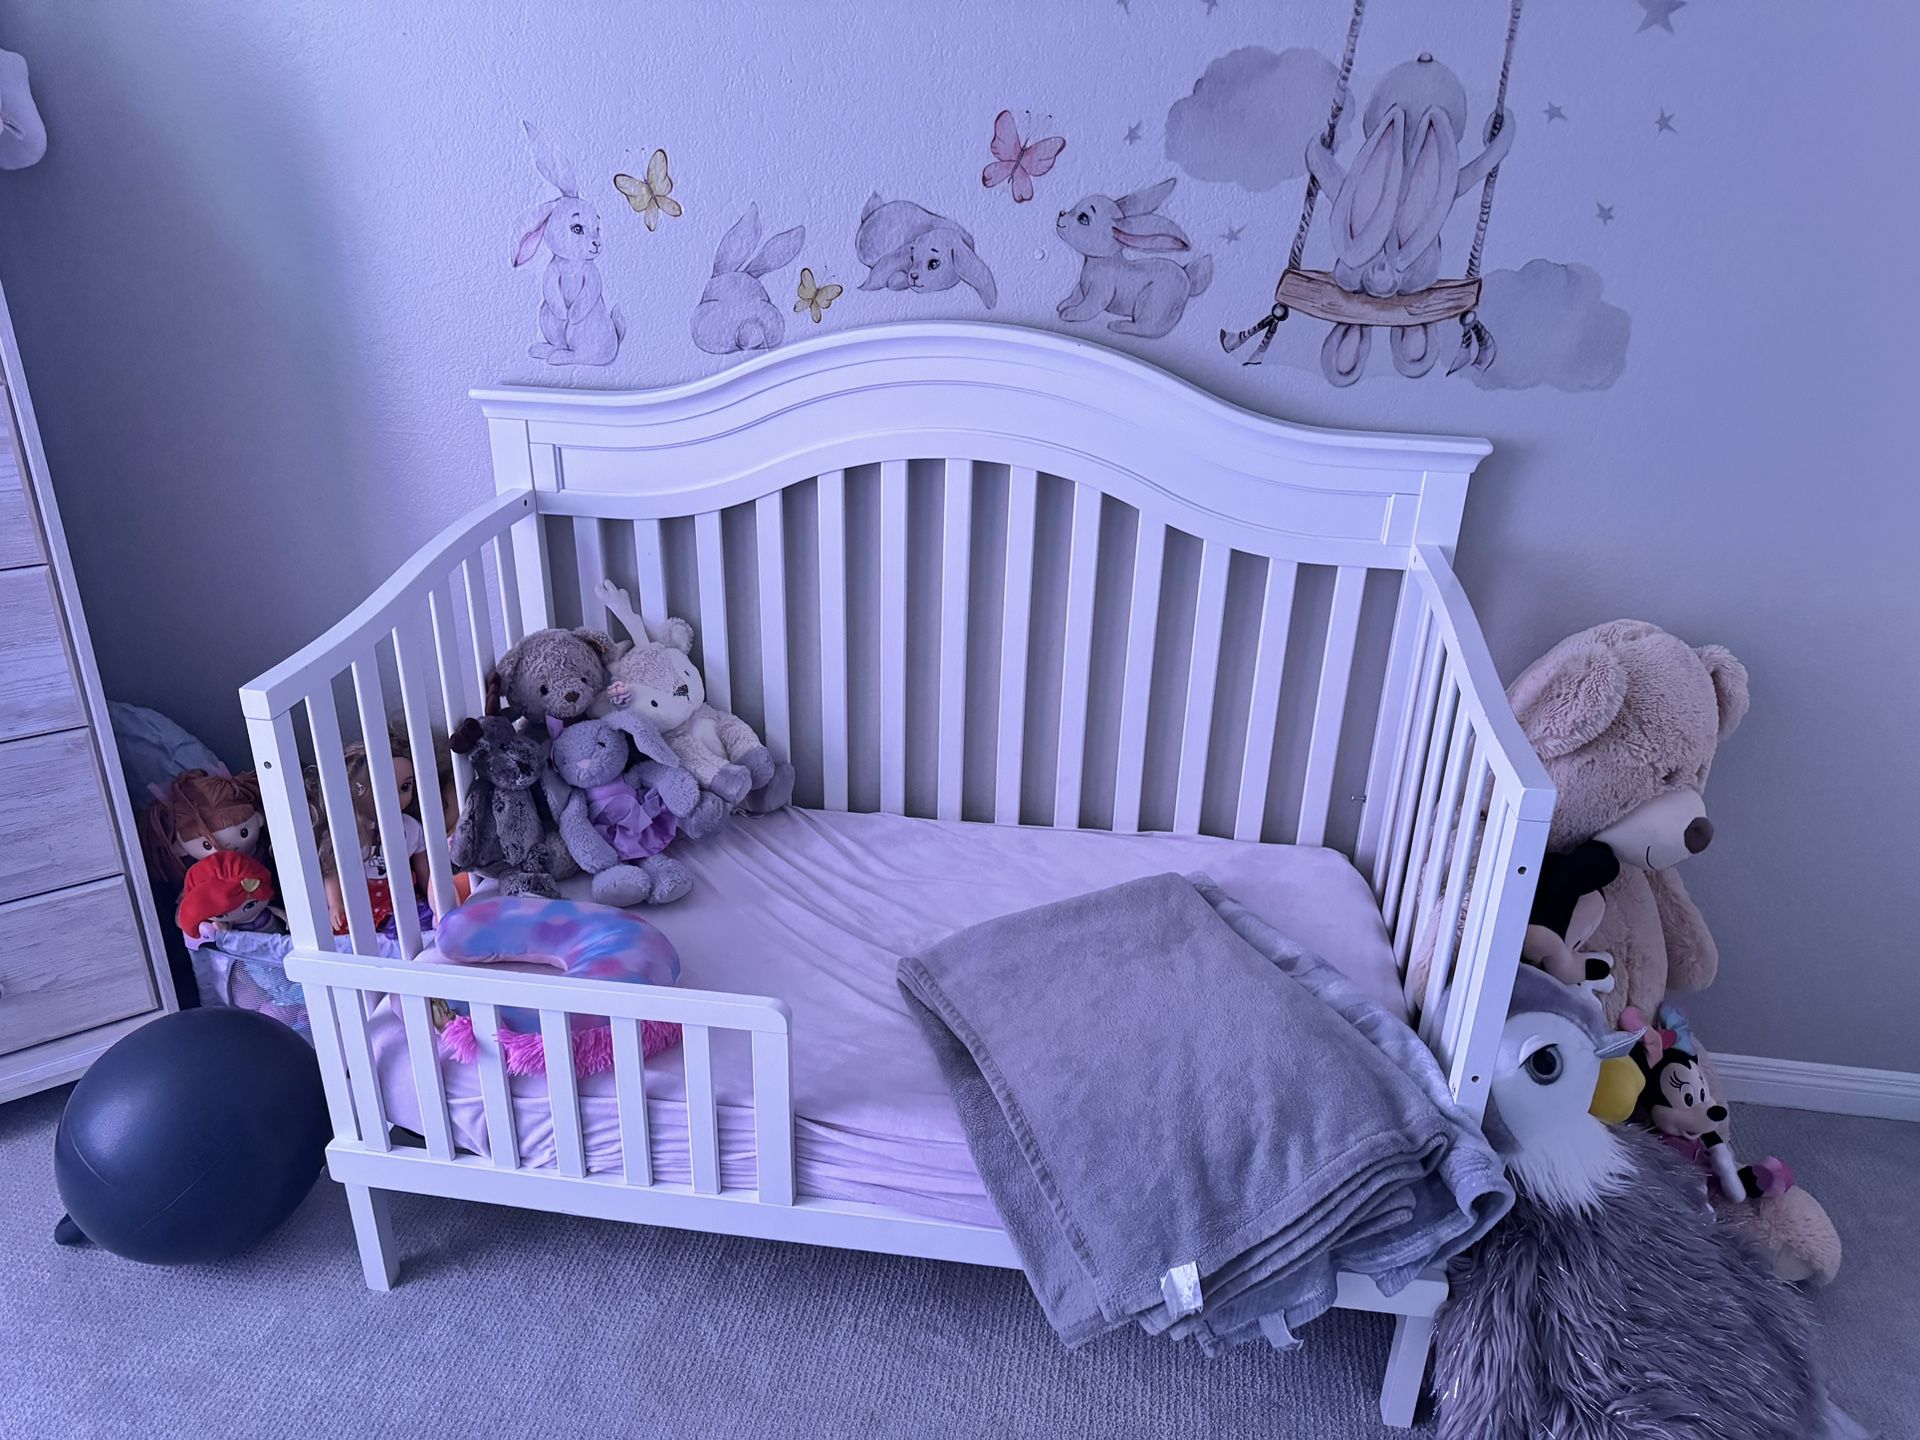 Baby Crib and Convertible Toddler Bed W Mattress 